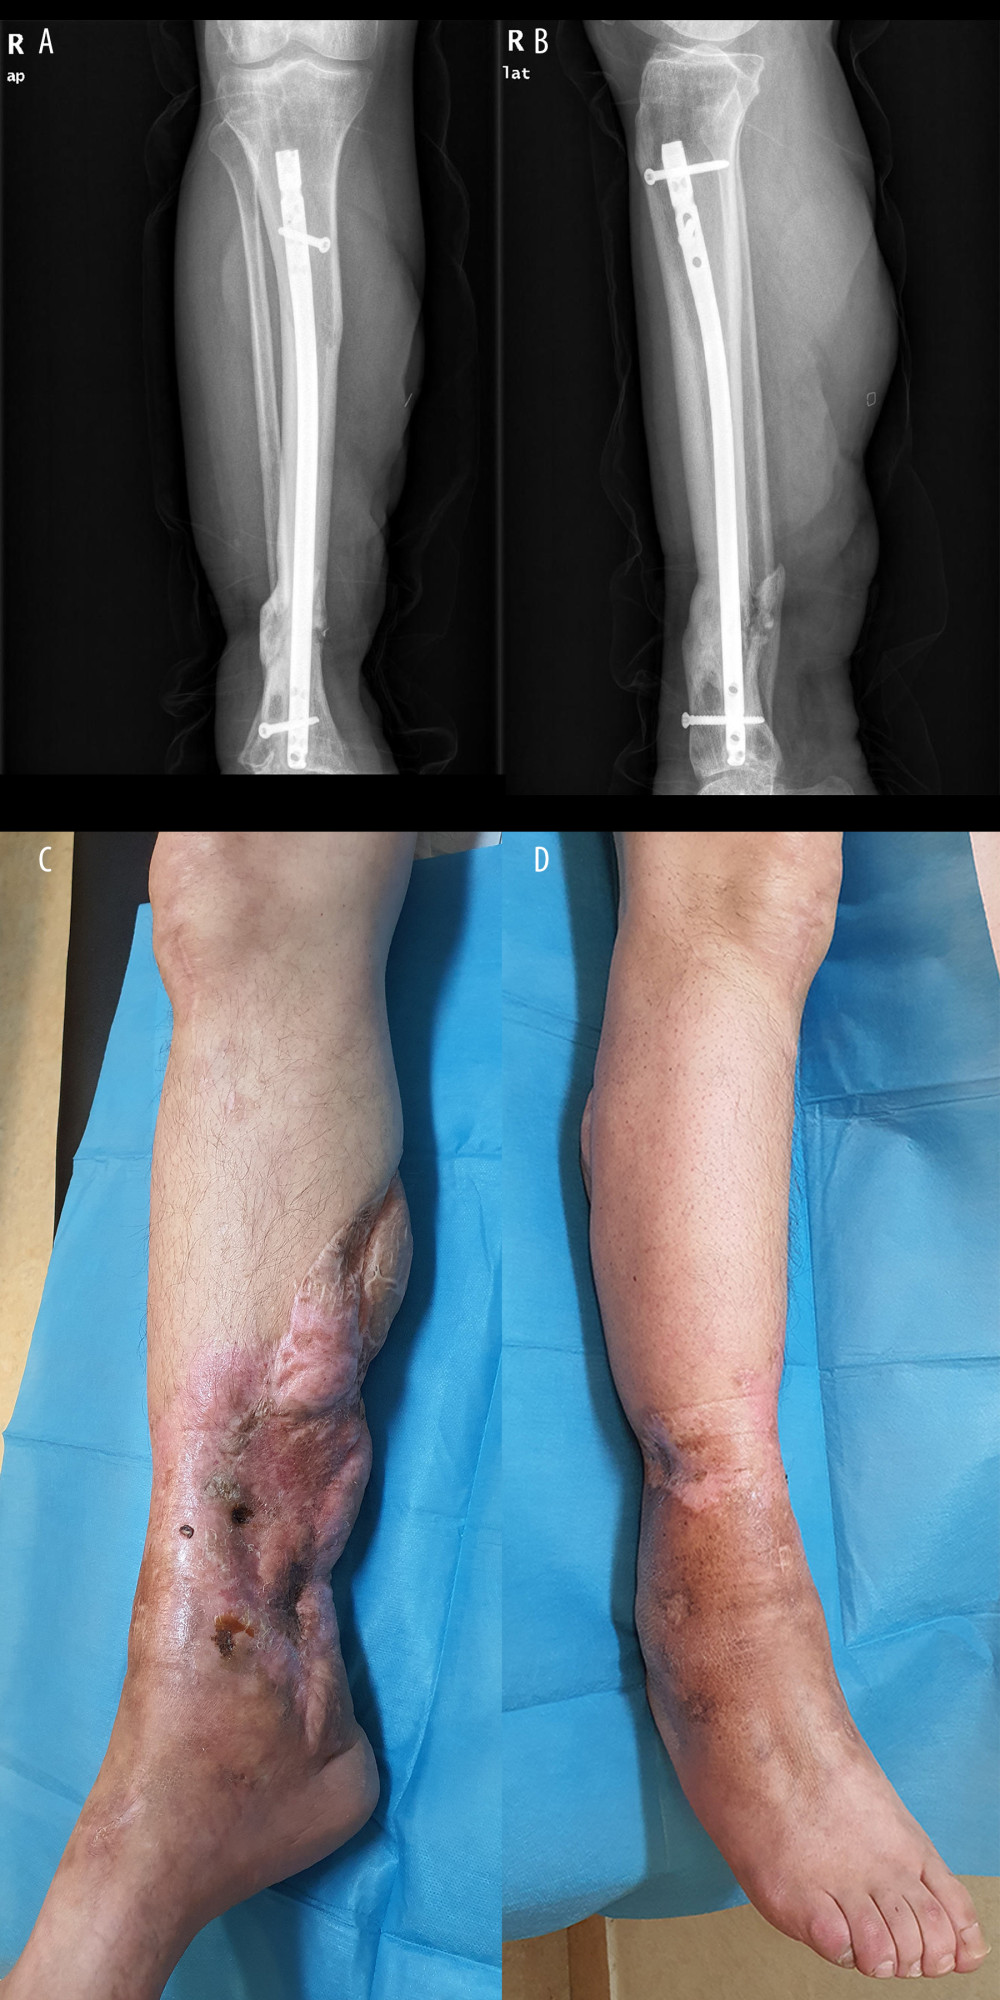 (A) Anteroposterior and (B) lateral X-ray of the leg 3 years after the injury. Note the closure of the bone gap and the fine consolidation of the free lateral bone fragment. (C) Medial and (D) lateral images of the leg.